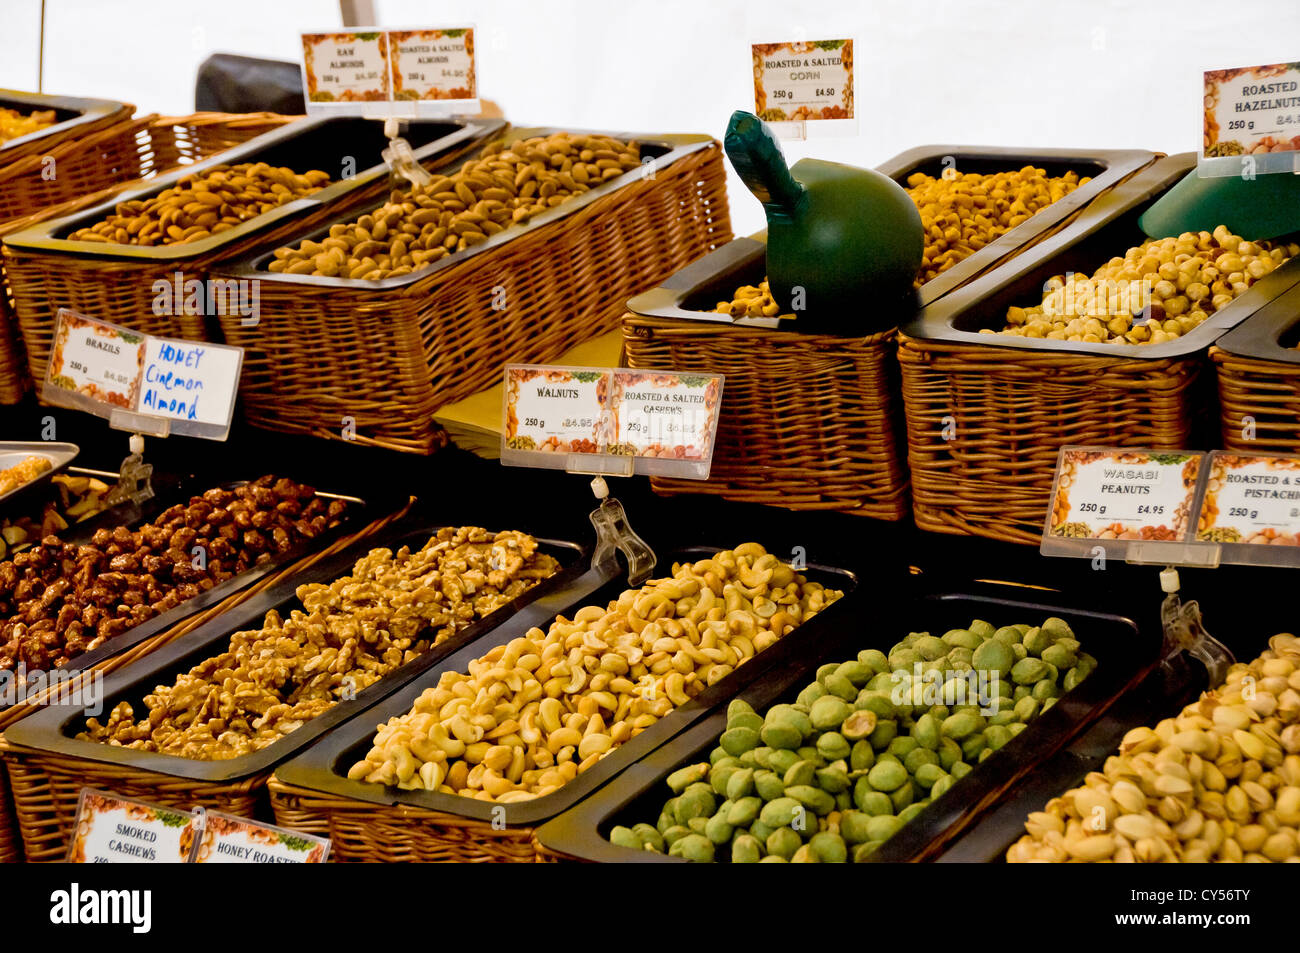 Nuts for sale on continental market stall York North Yorkshire England UK United Kingdom GB Great Britain Stock Photo